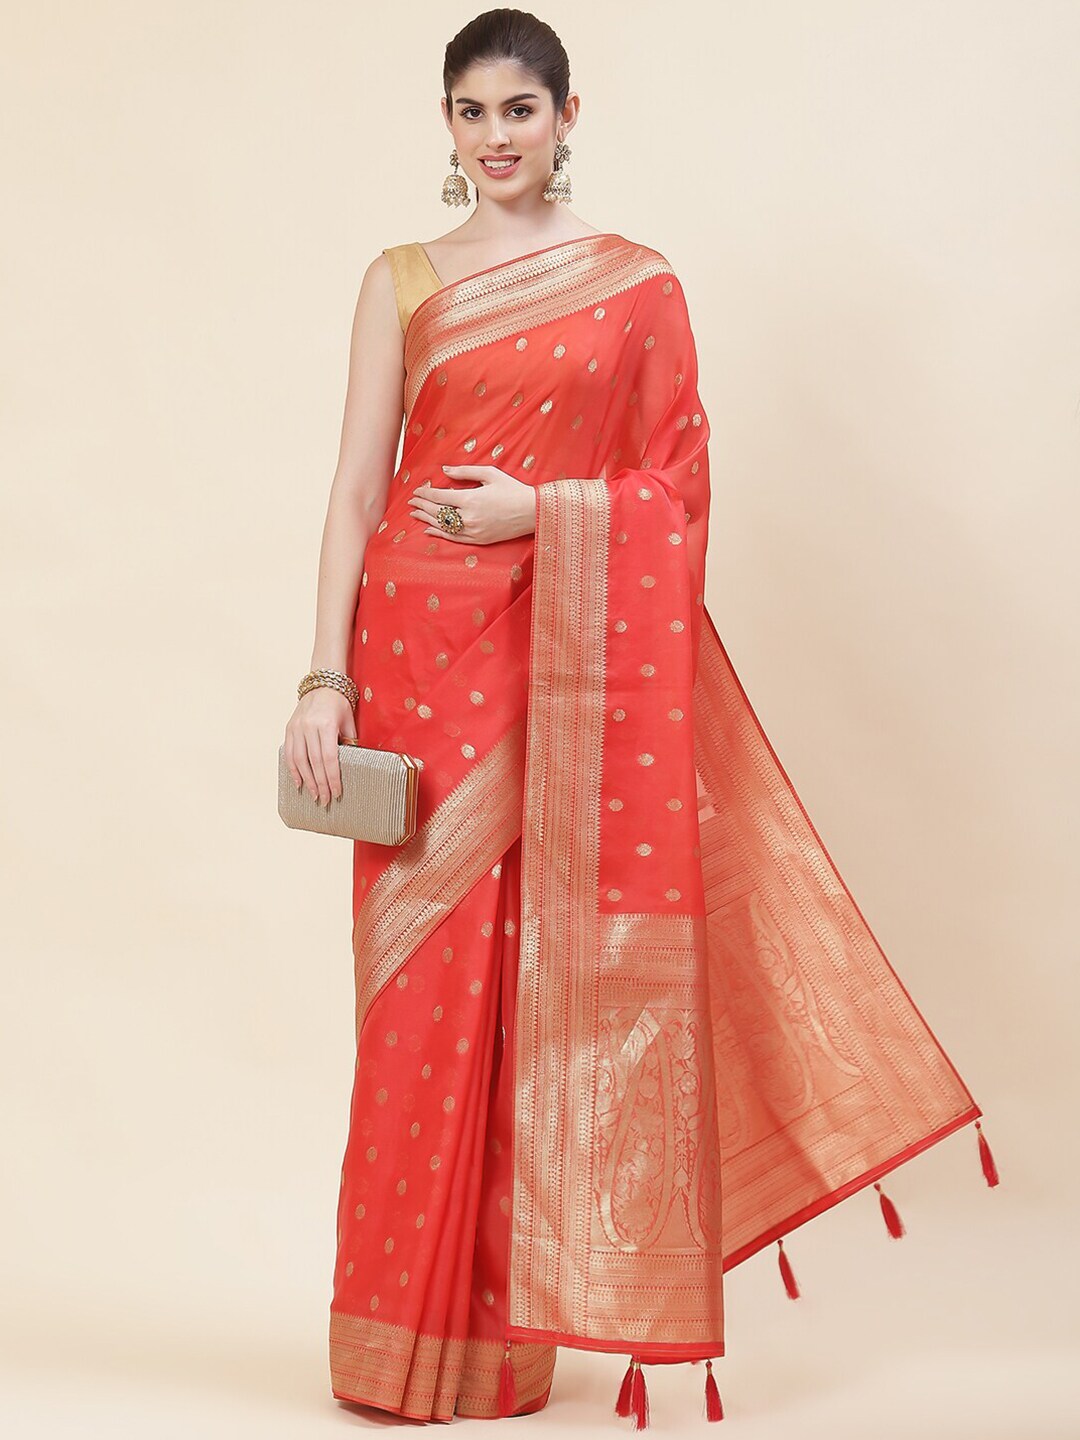 Stunning Red Party Wear Saree at Rs.2599/Piece in chandigarh offer by Meena  Bazaar